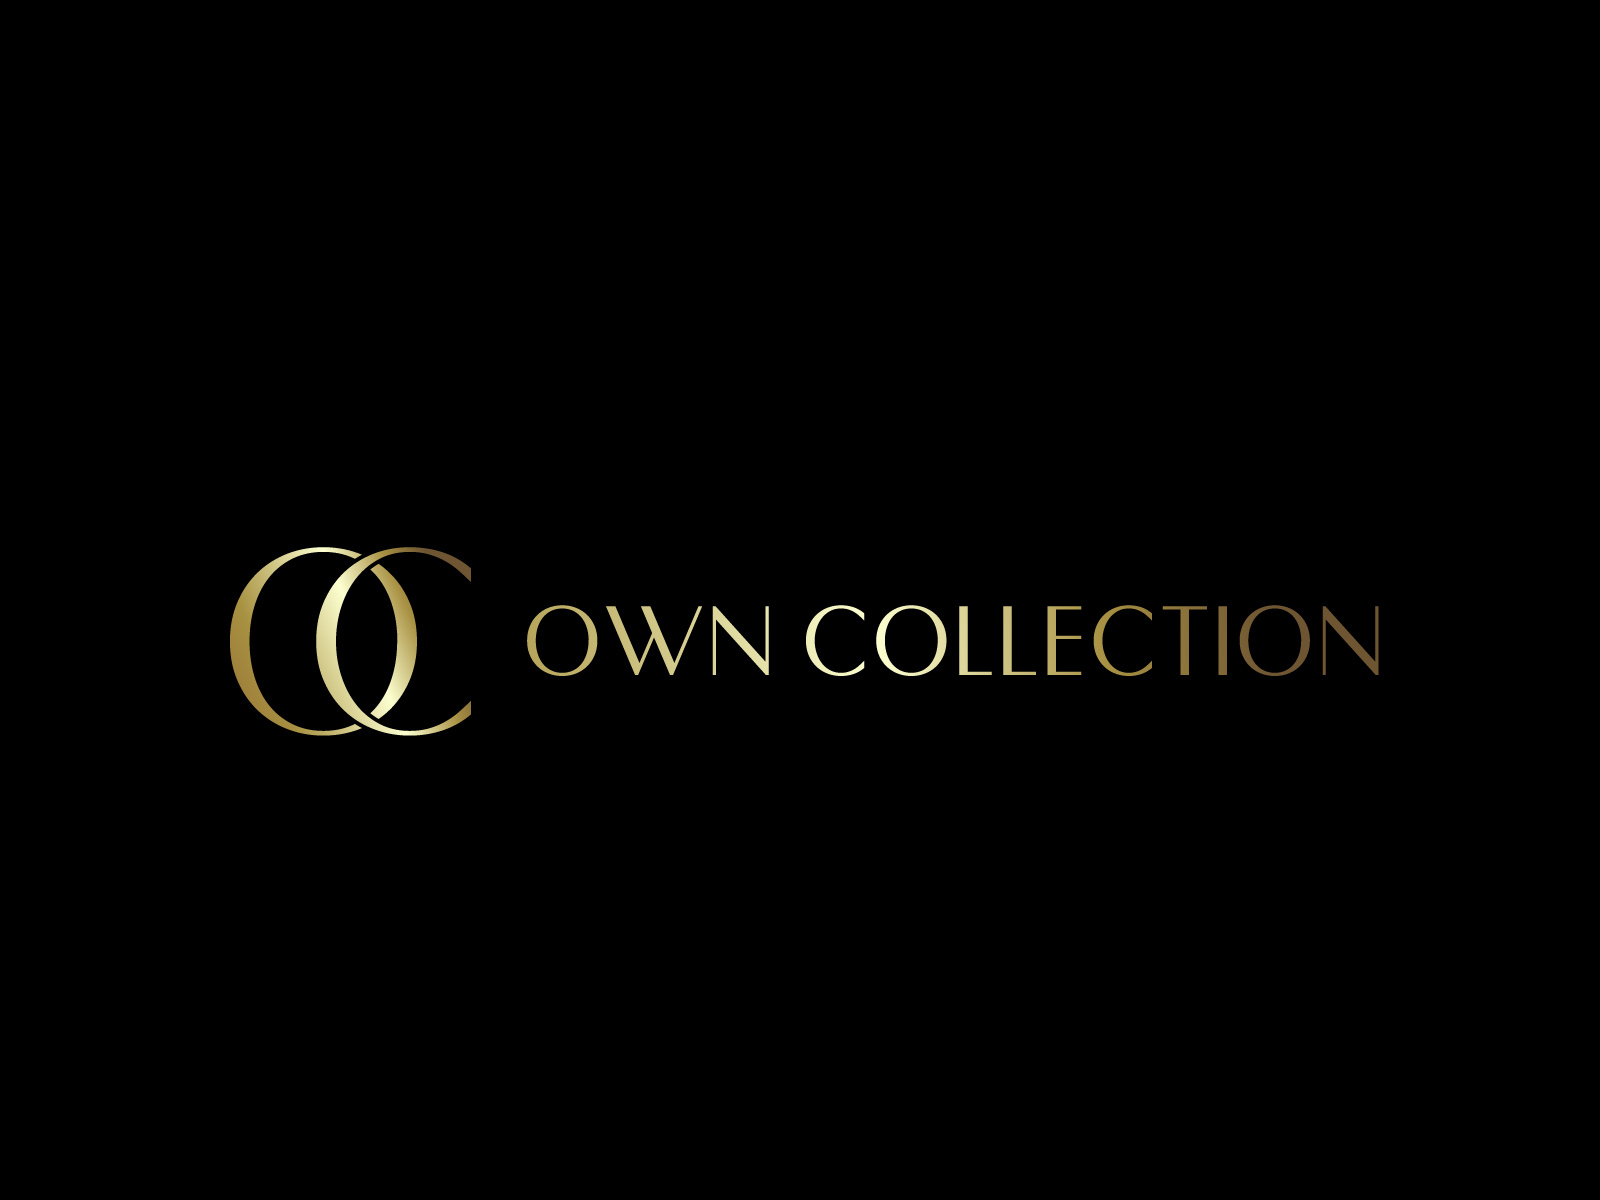 Own Collection by Jahid Hasan on Dribbble